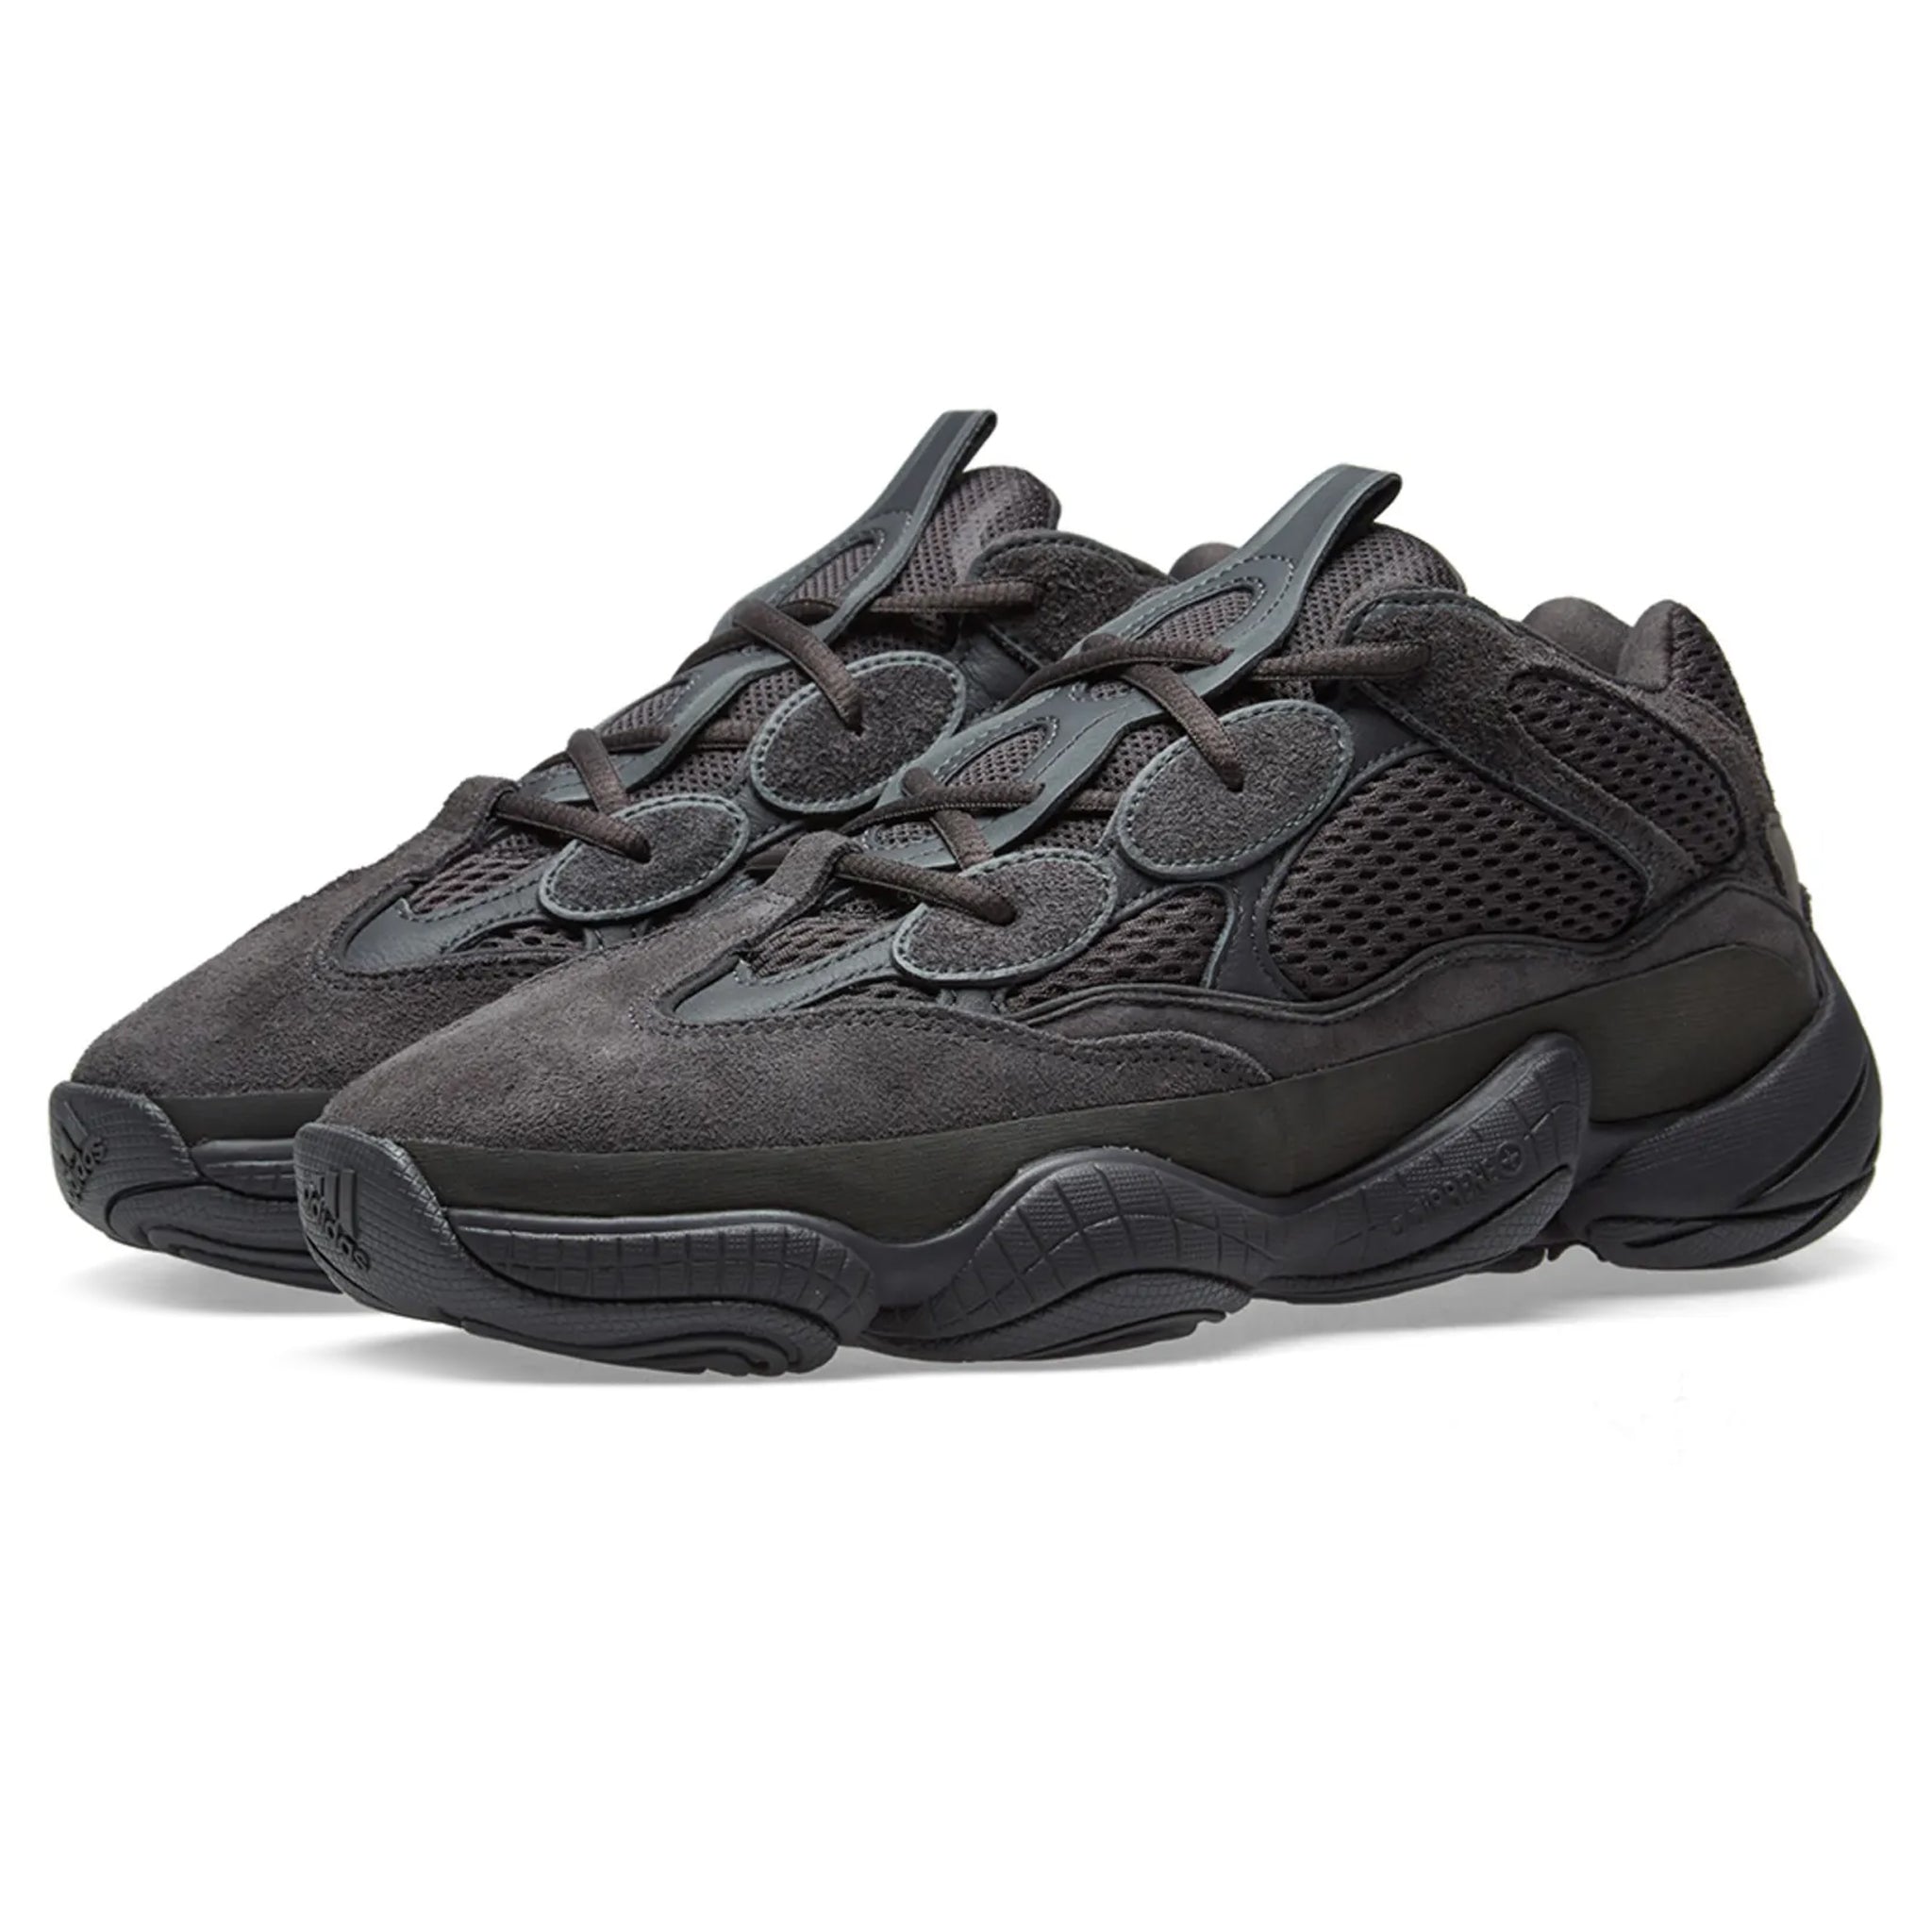 Front side view of Adidas Yeezy 500 Utility Black F36640